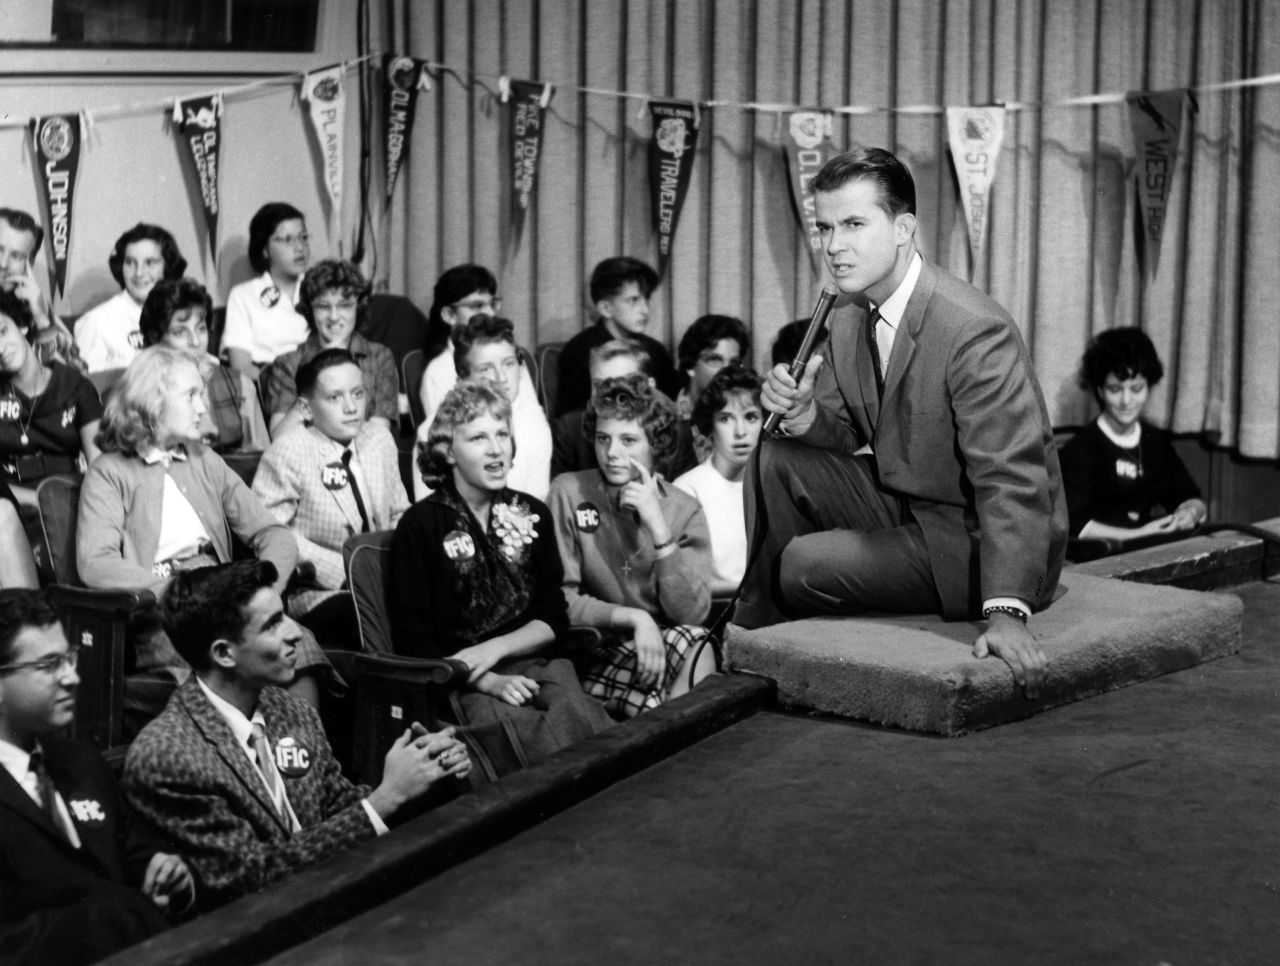 "American Bandstand" was the most popular dance show of all time.